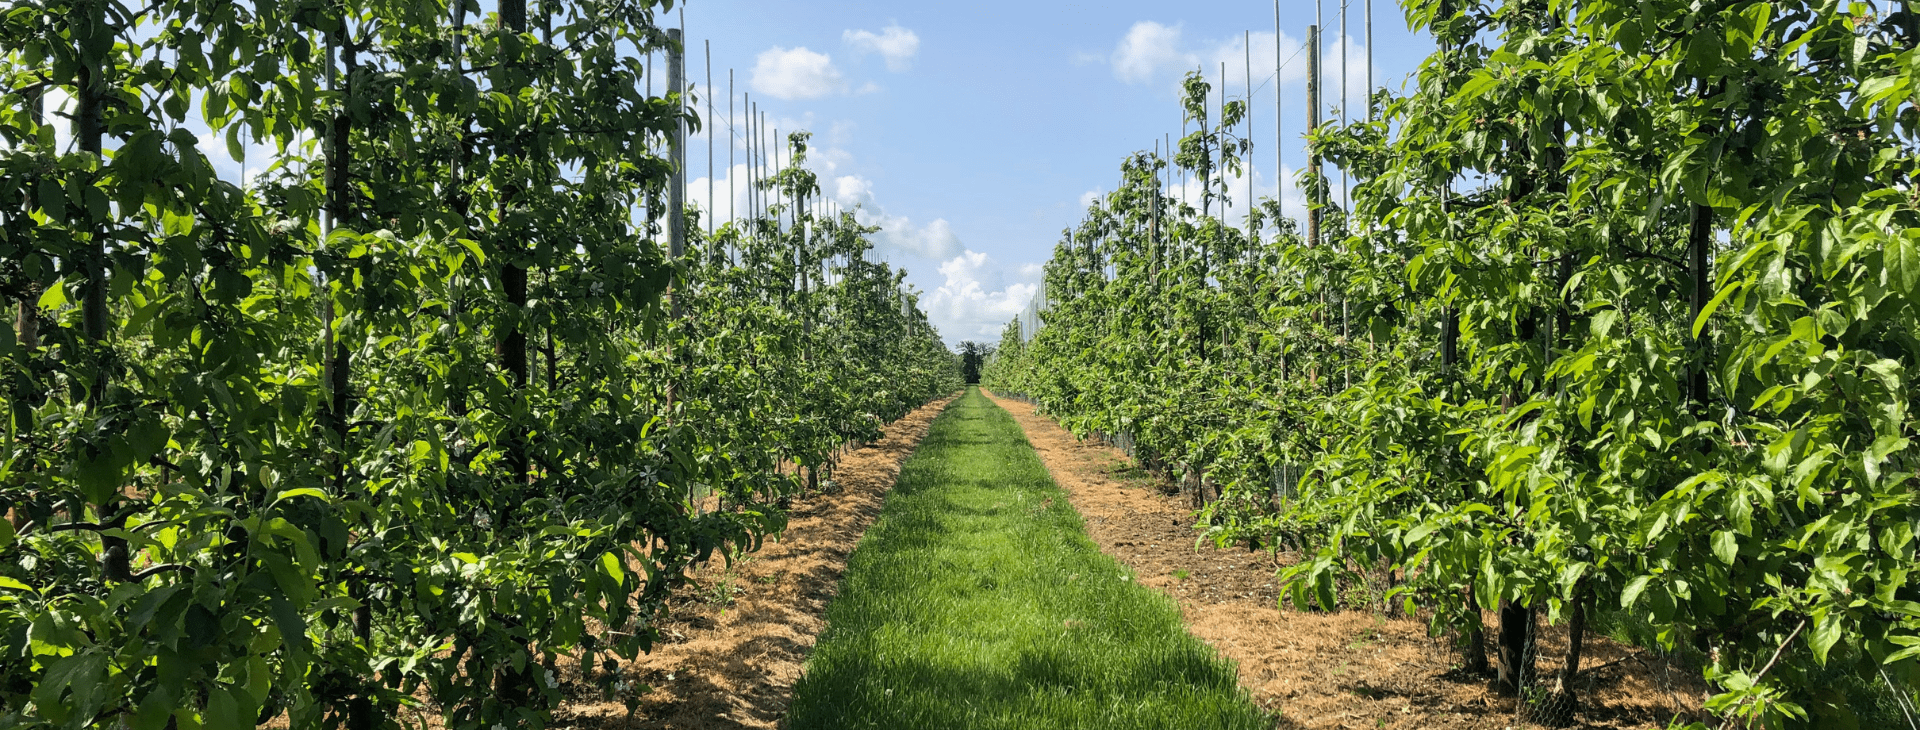 Image of an orchard